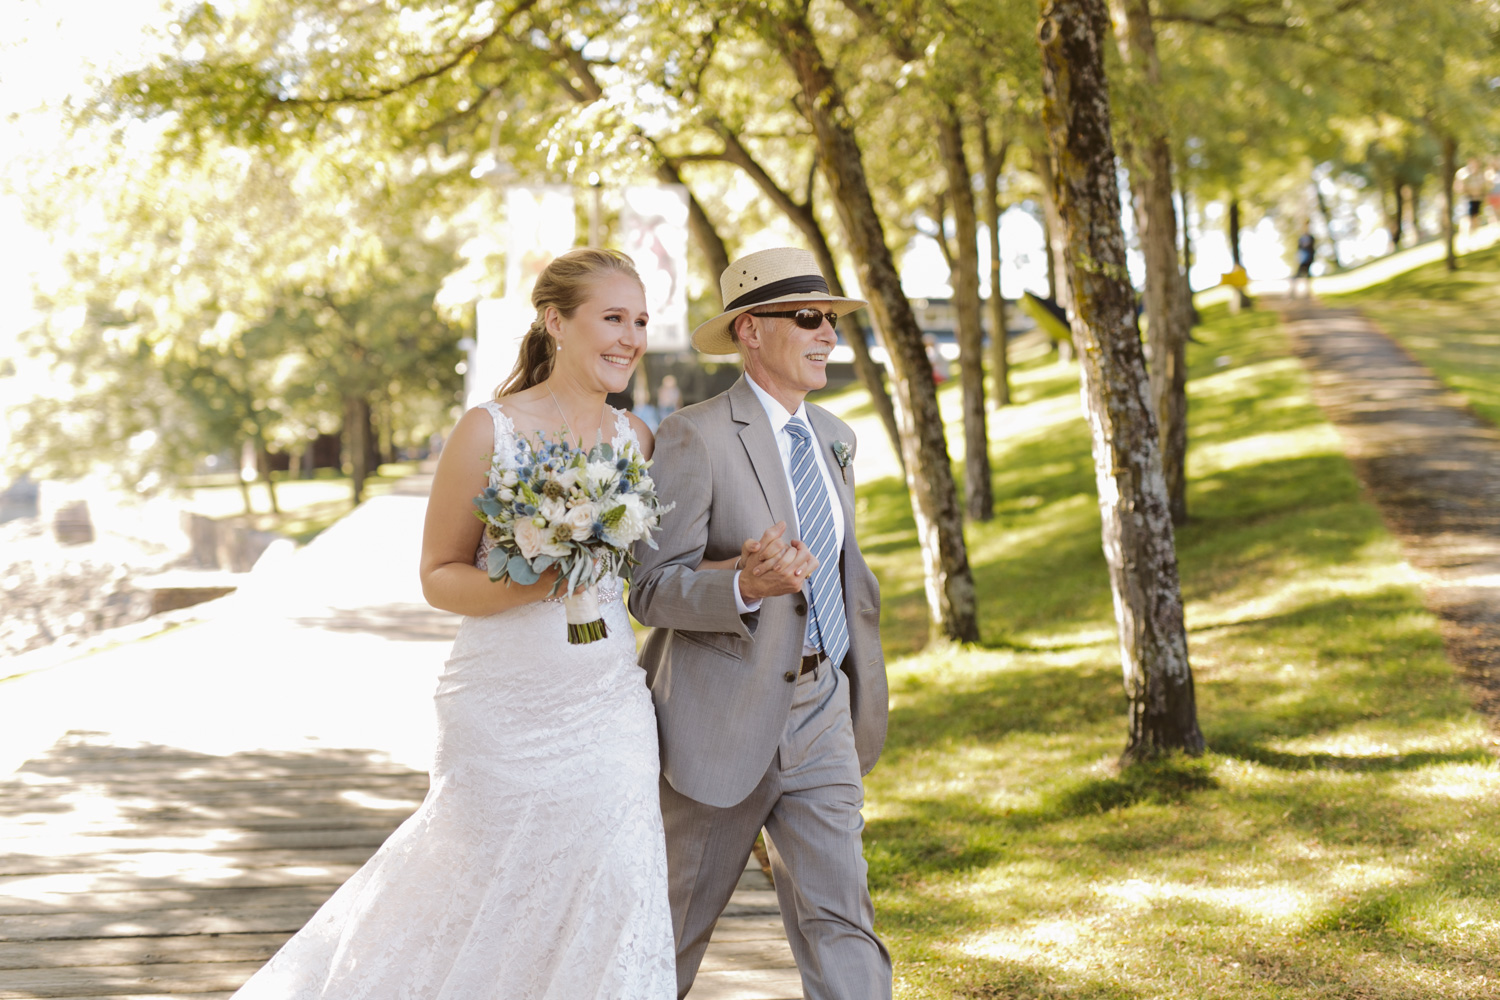 Steph & Jacob | Wedding Photos - Bride & Father | Wedding & Event Planners | Dreamgroup